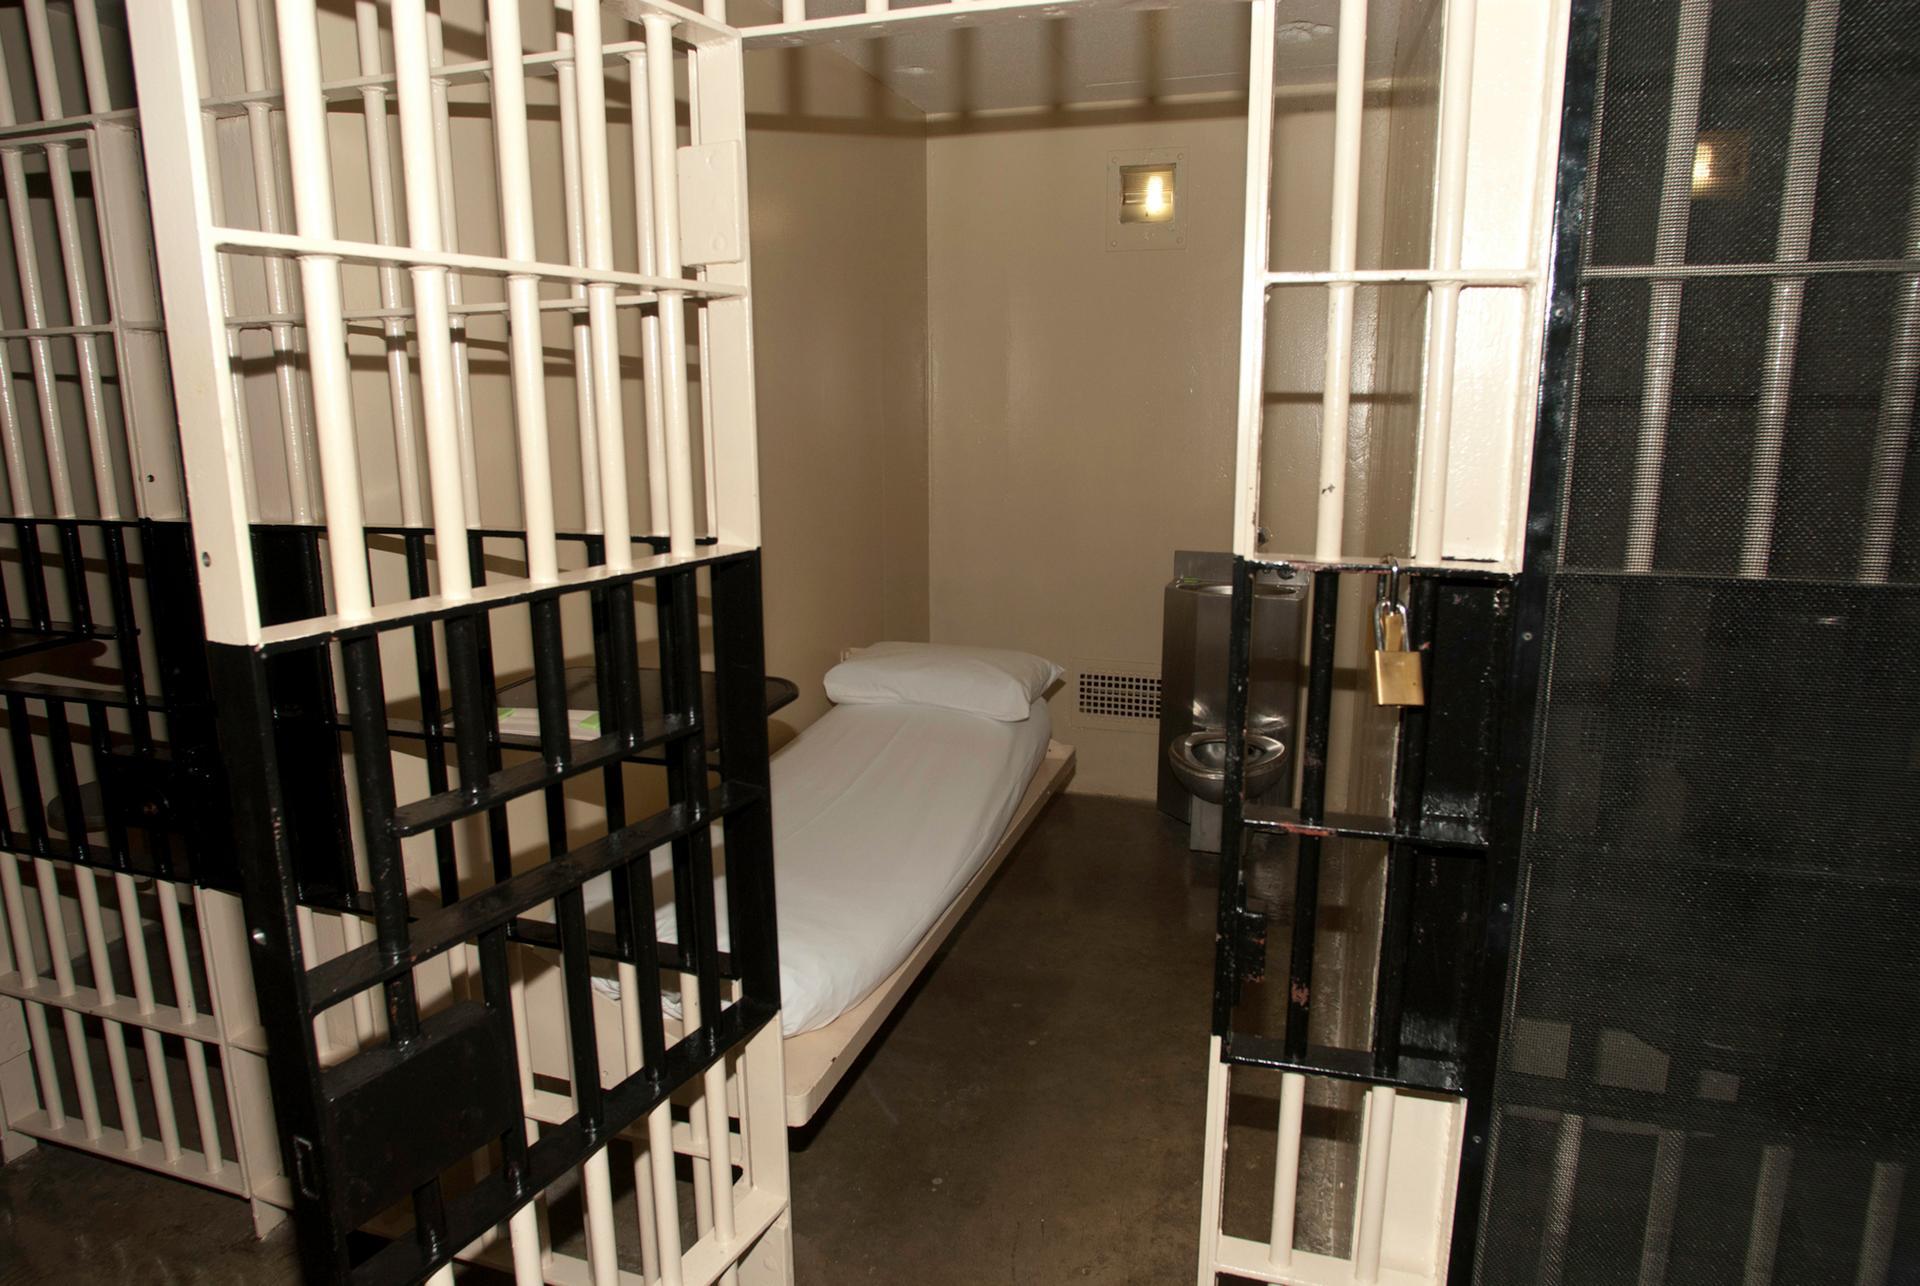 A jail cell on death row, where prison inmates await execution